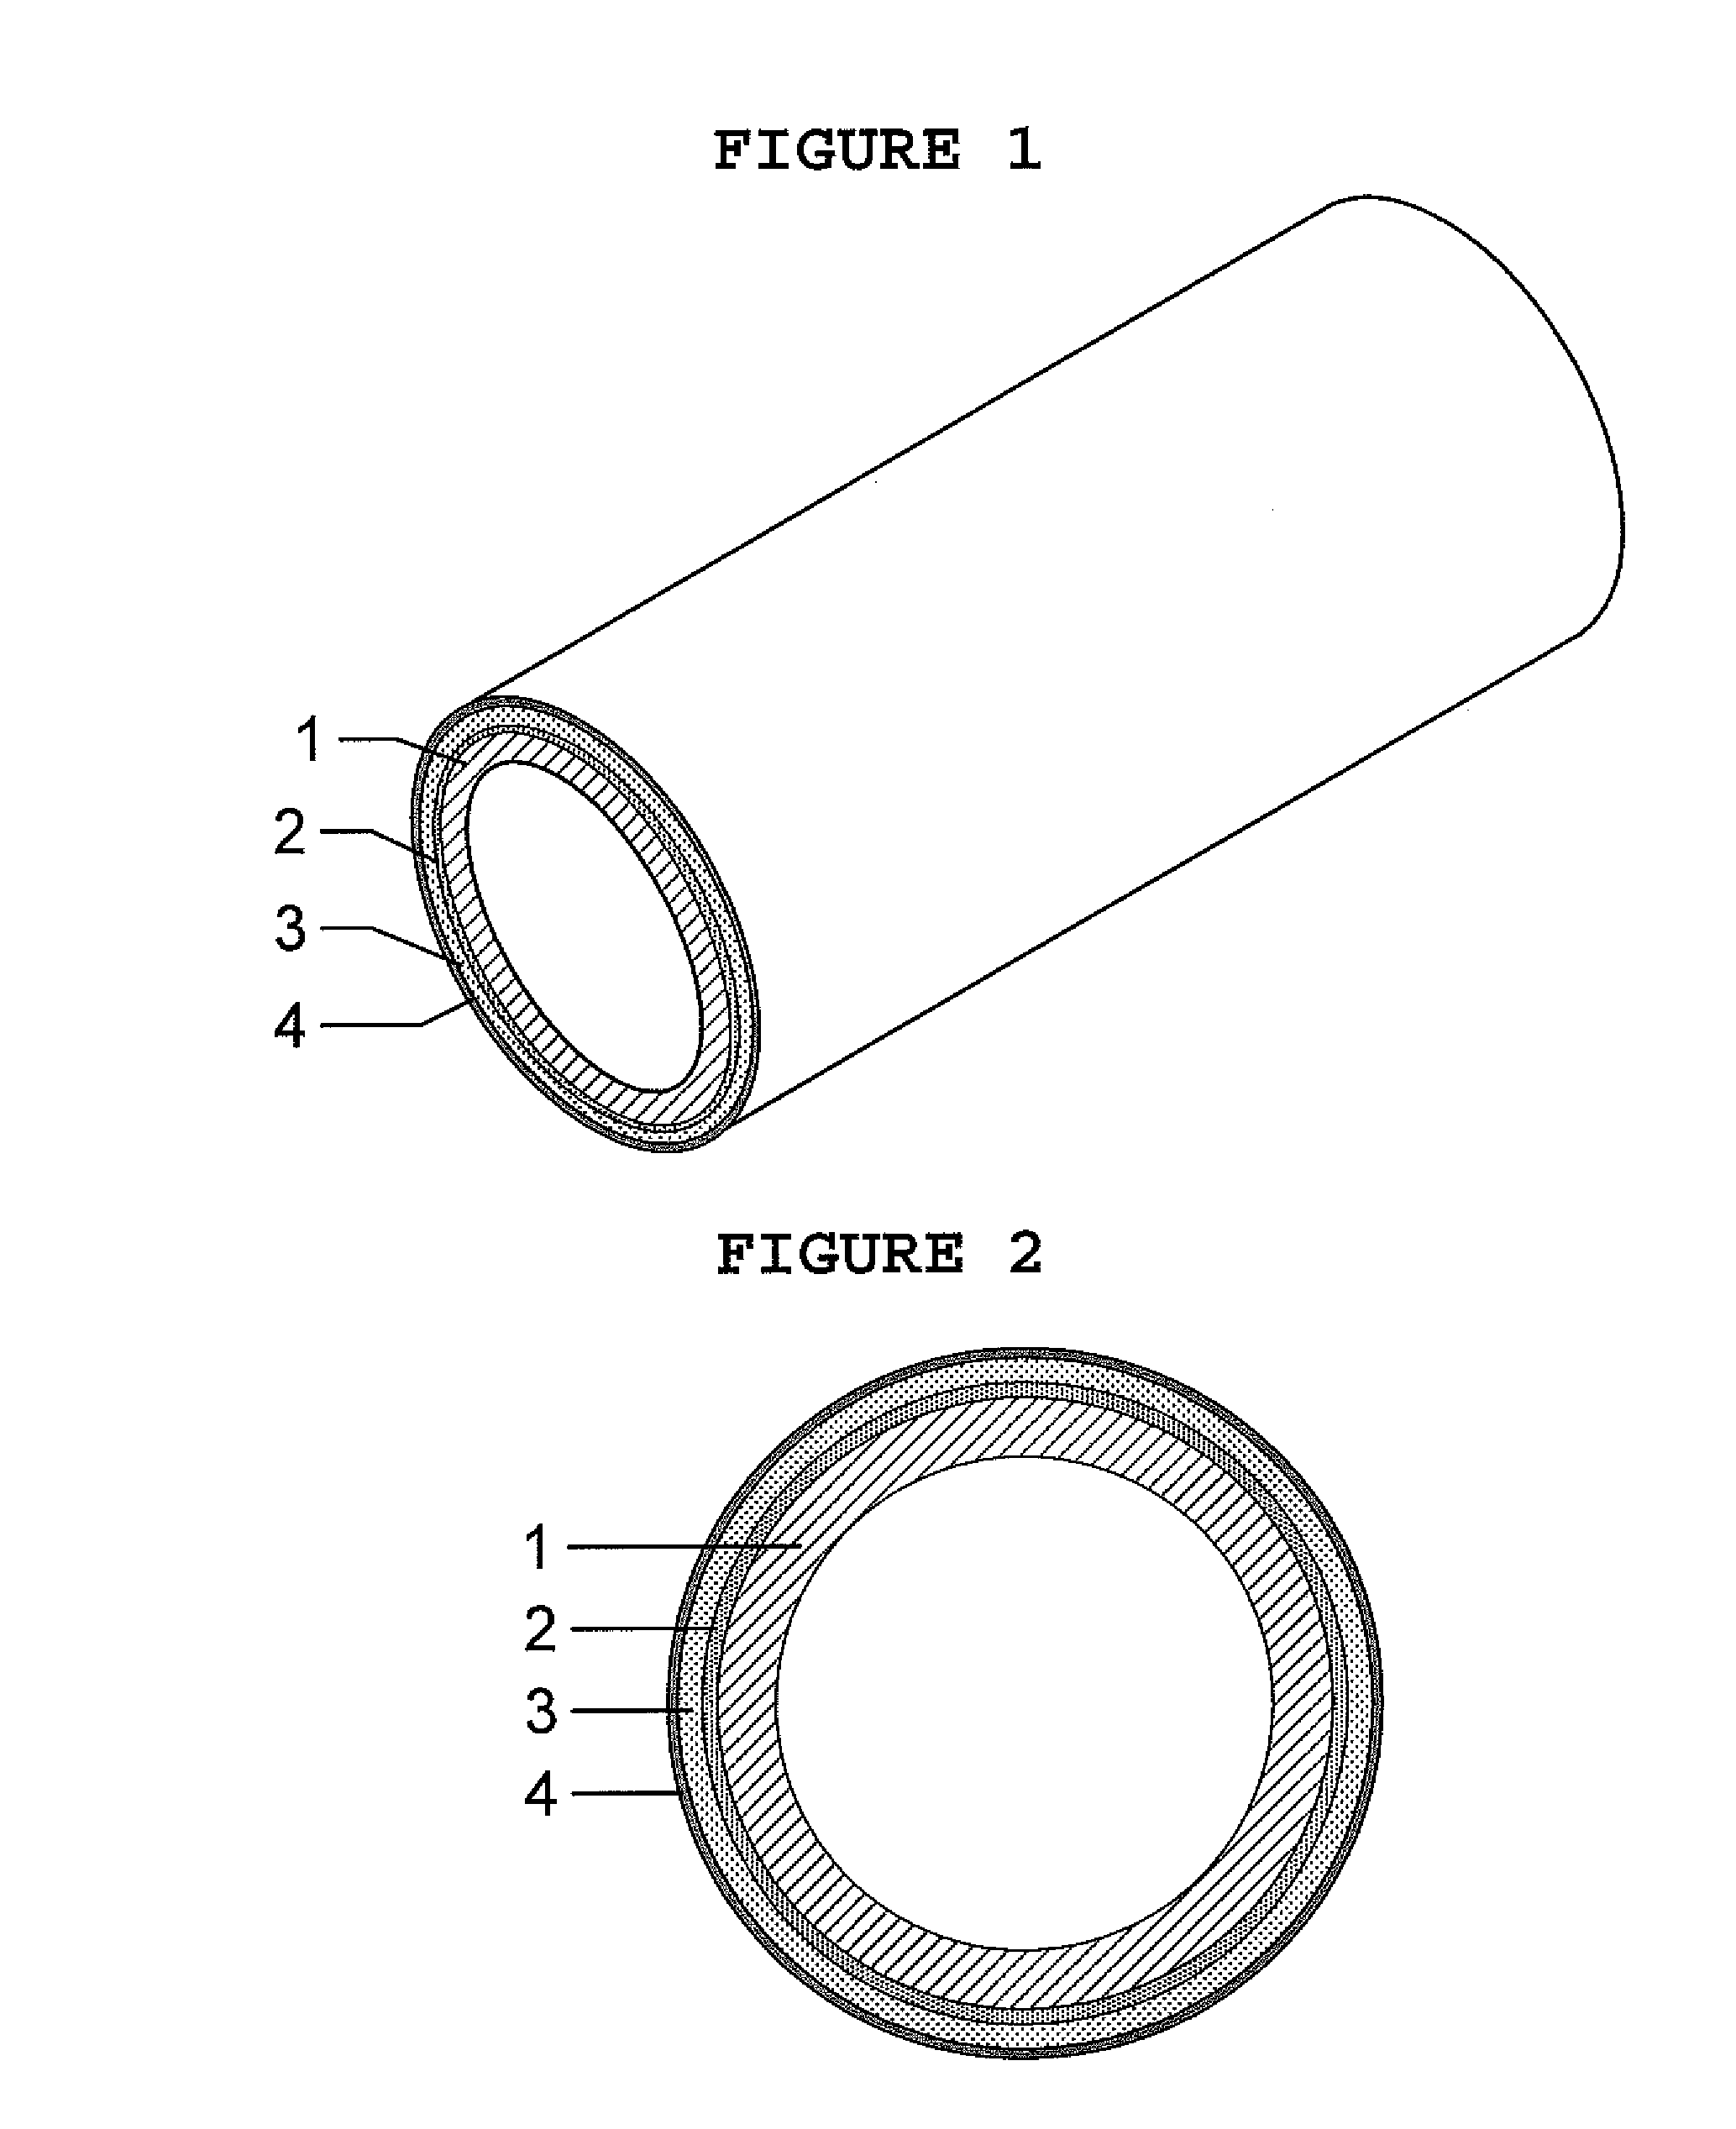 Method of manufacturing rotogravure cylinders